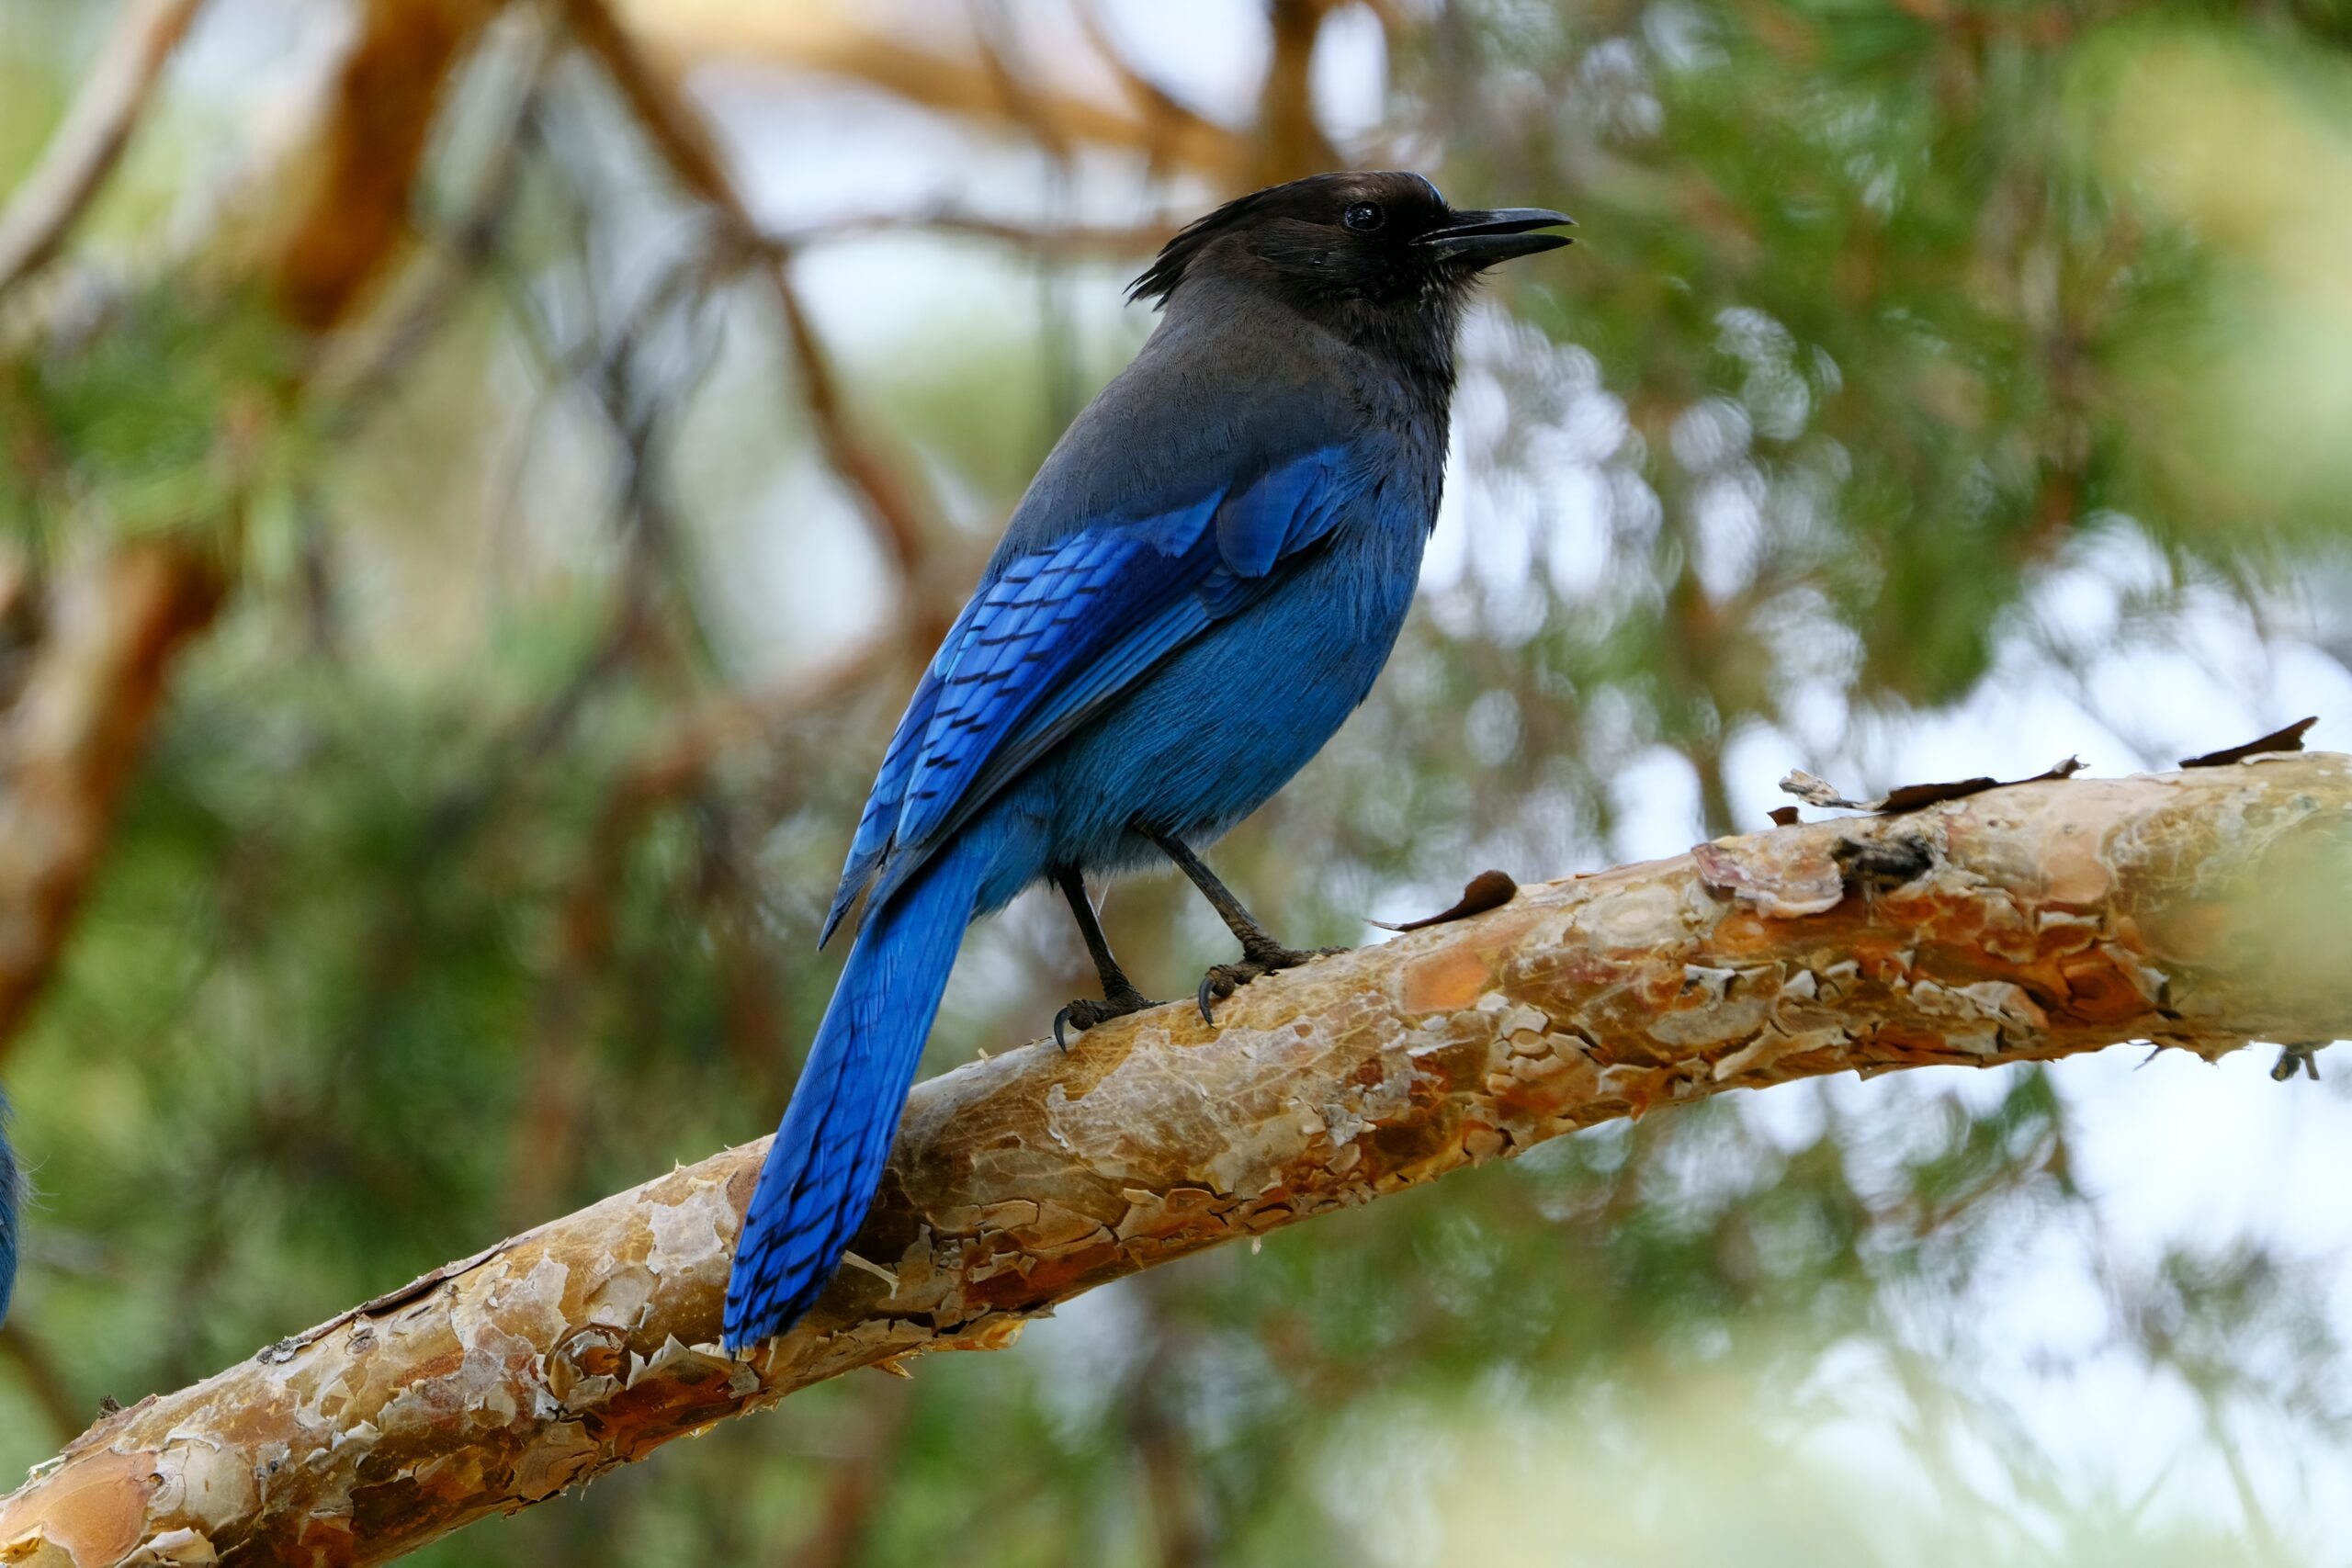 Steller's Jay bird, adorned in black and blue hues, perched gracefully on a tree bark.